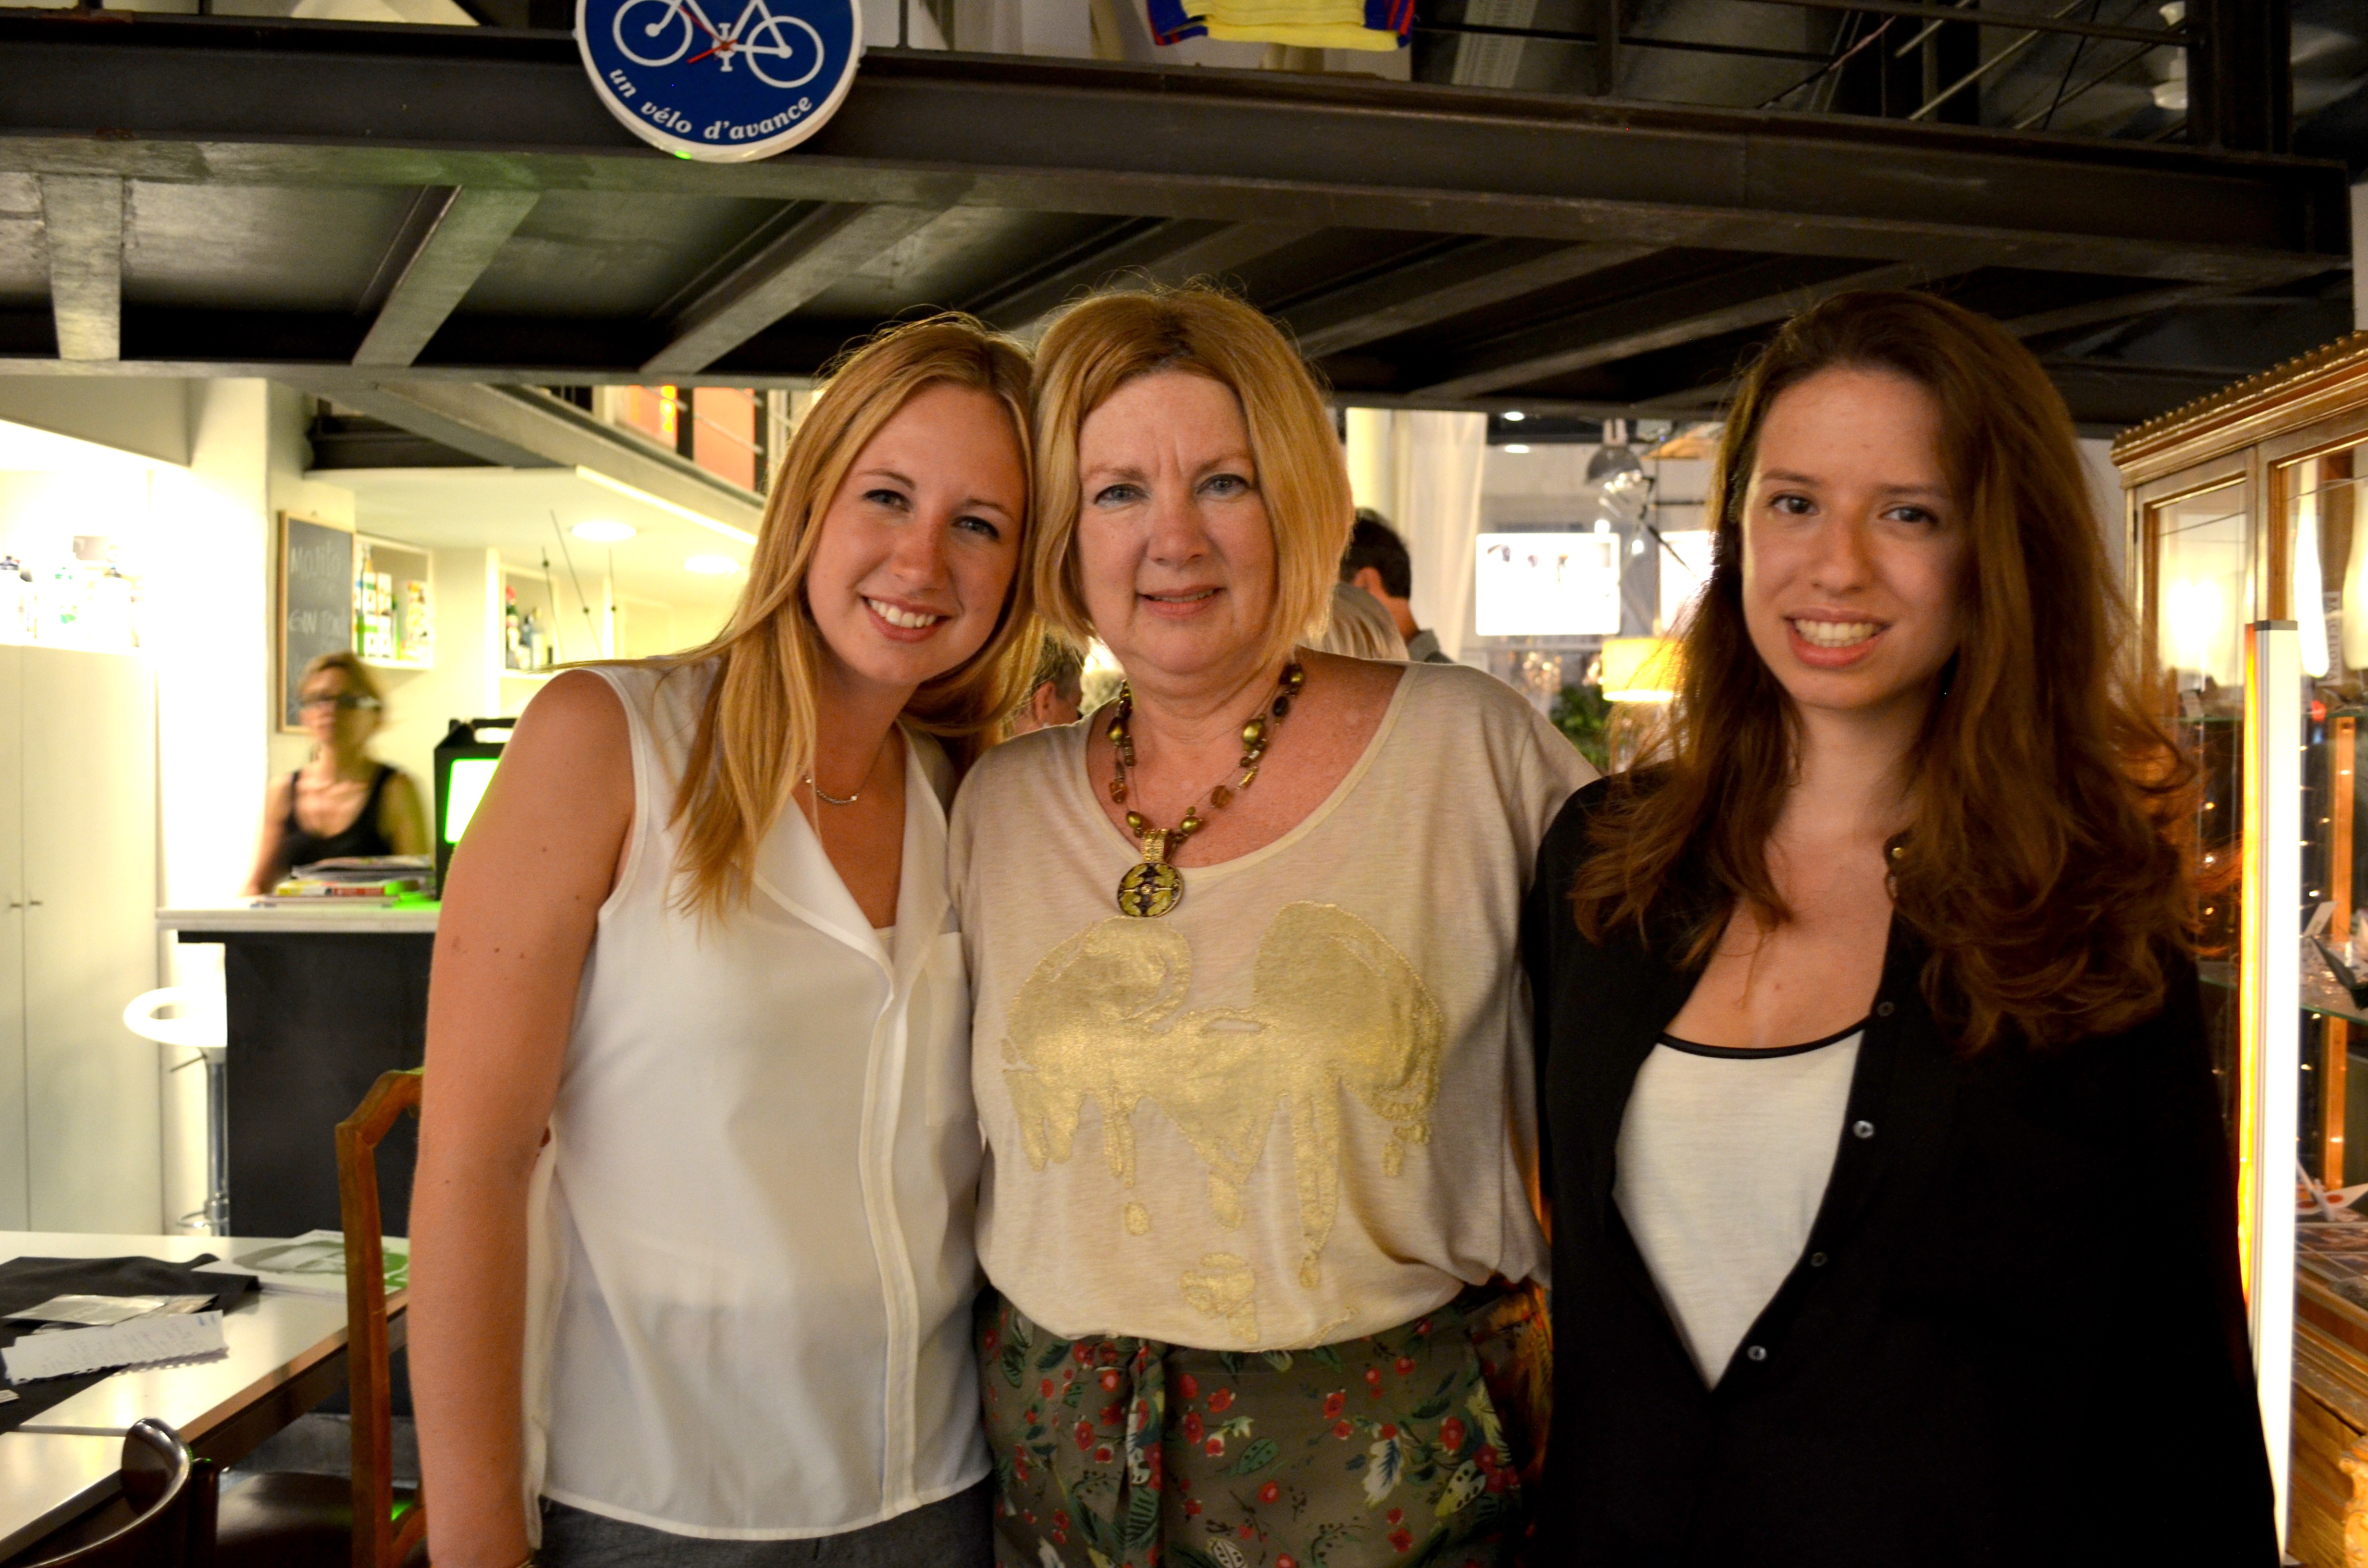 Café Milonga premiere. Jo Ann with her daughter Alicia Borobio (left) and Ginebra Vall, post production manager of the film.